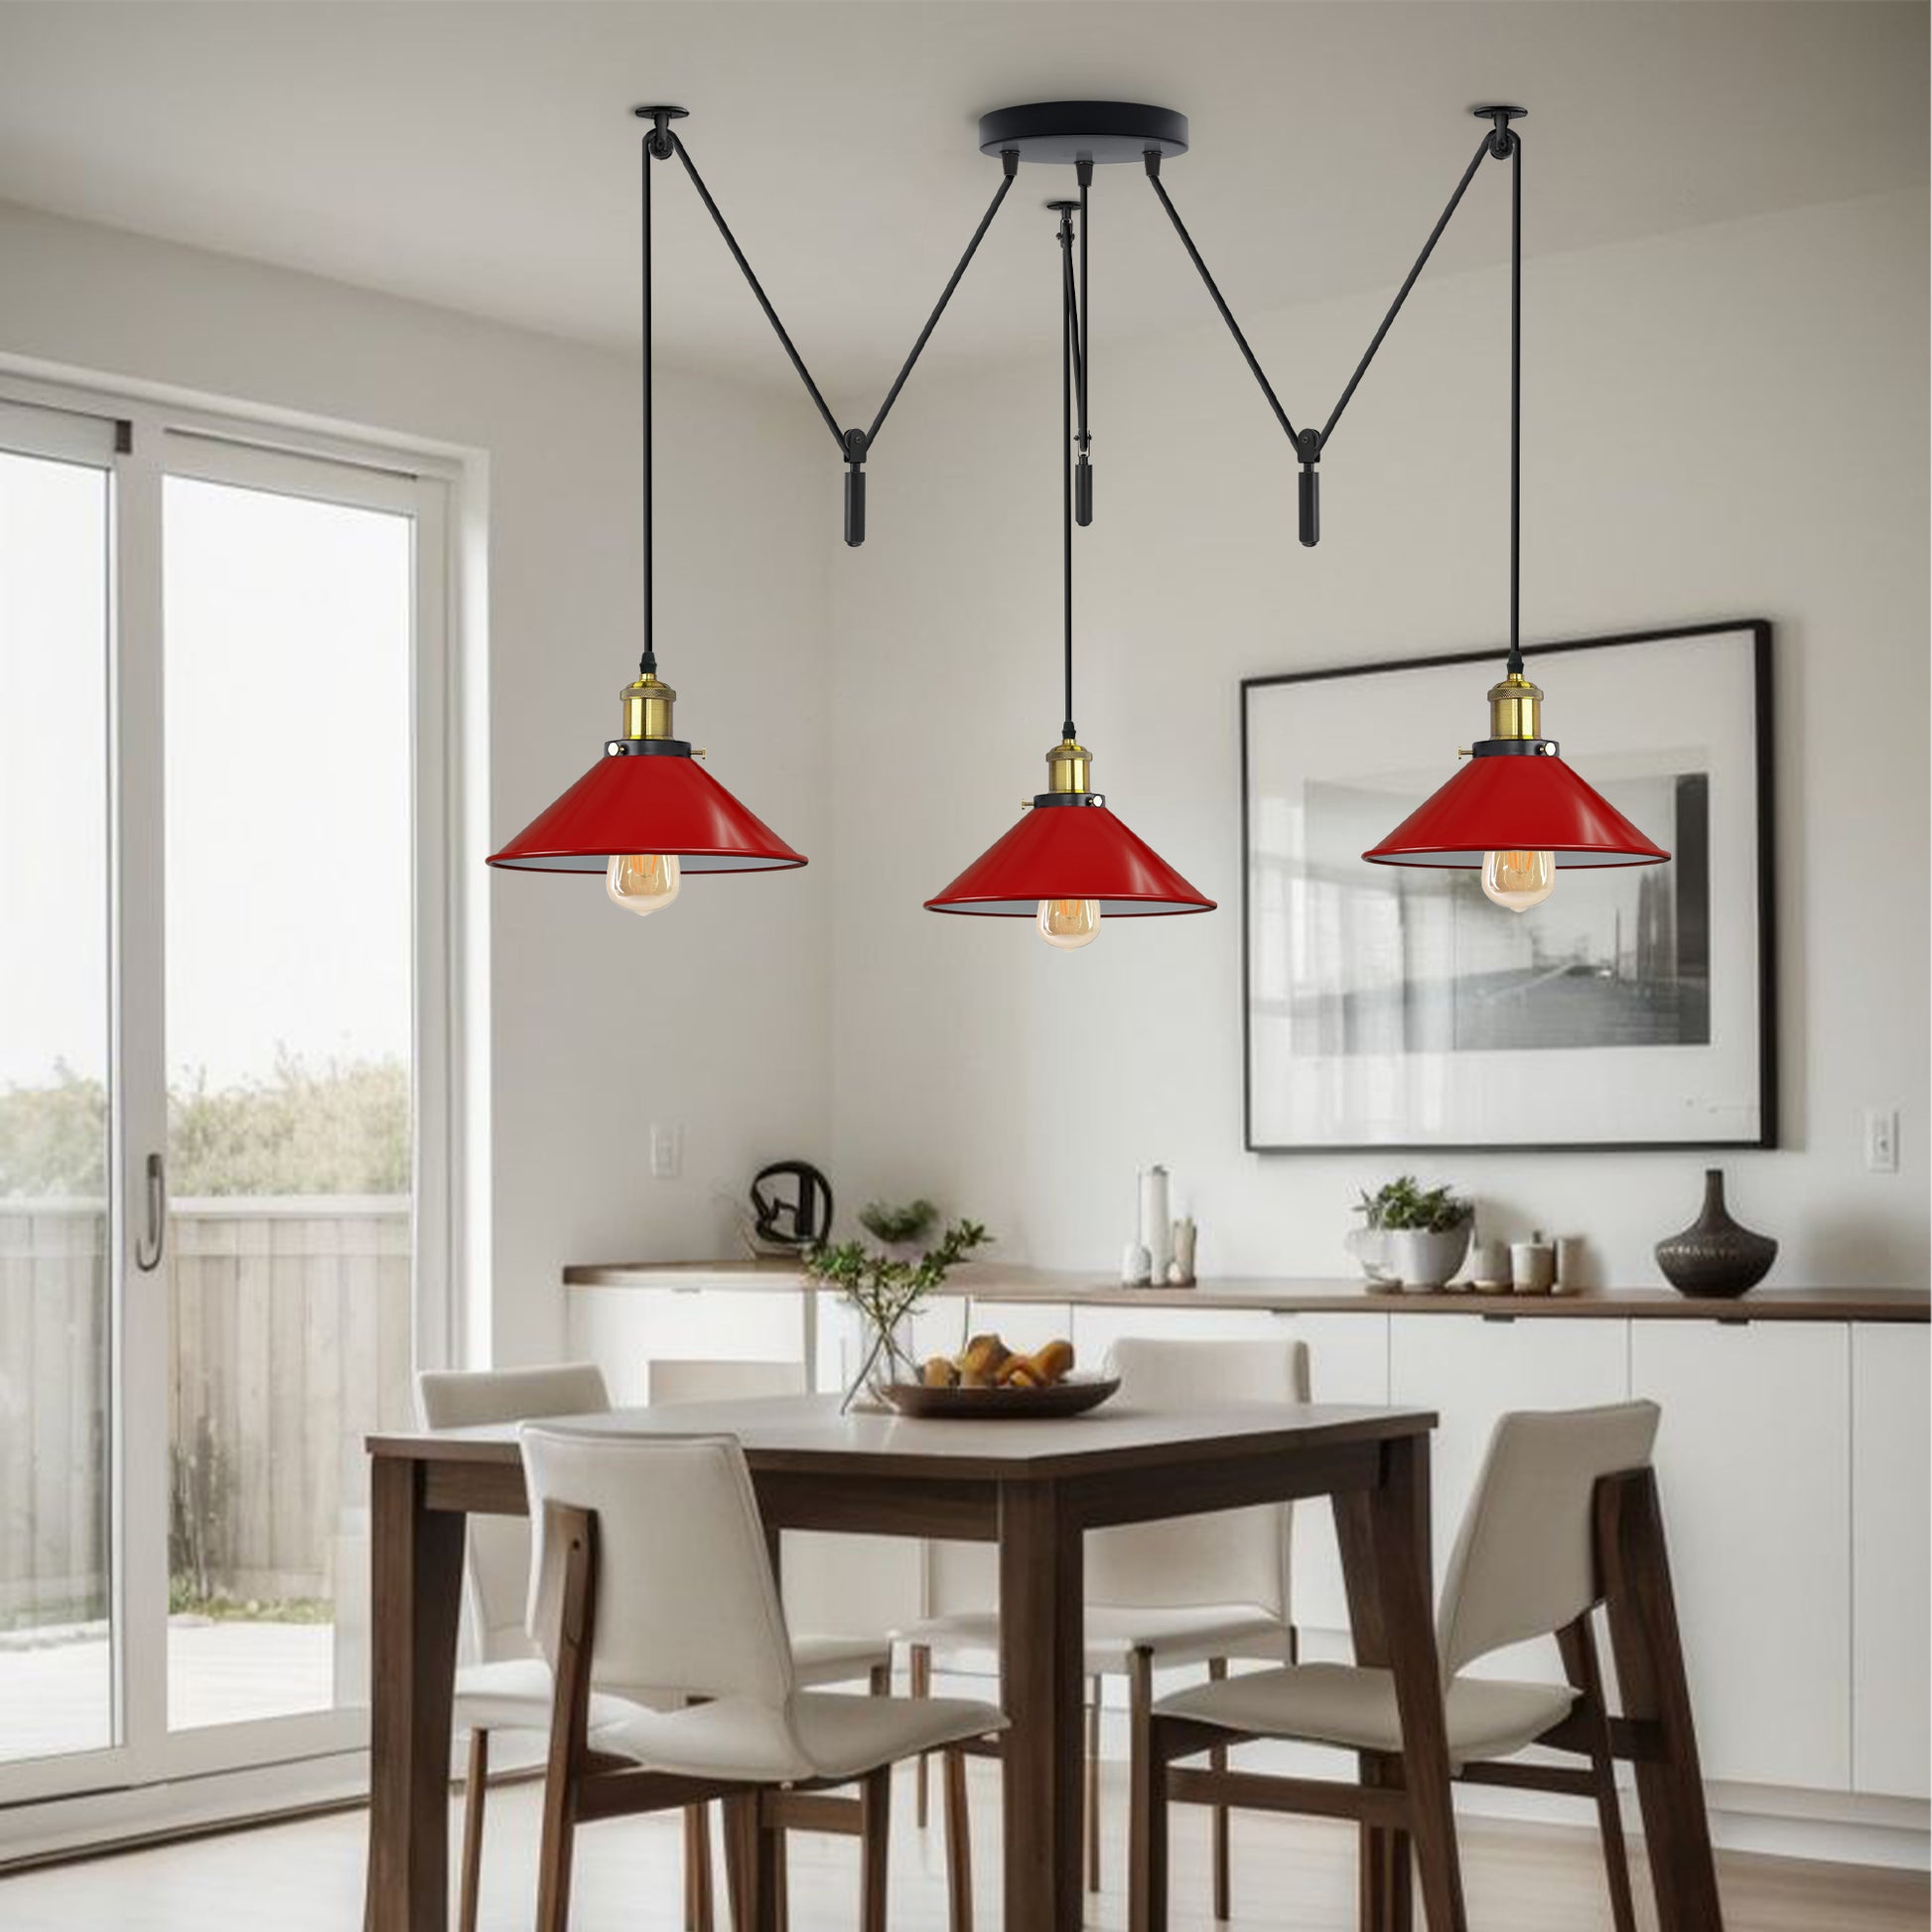 Red 3 pendant light with adjustable for dining room.JPG